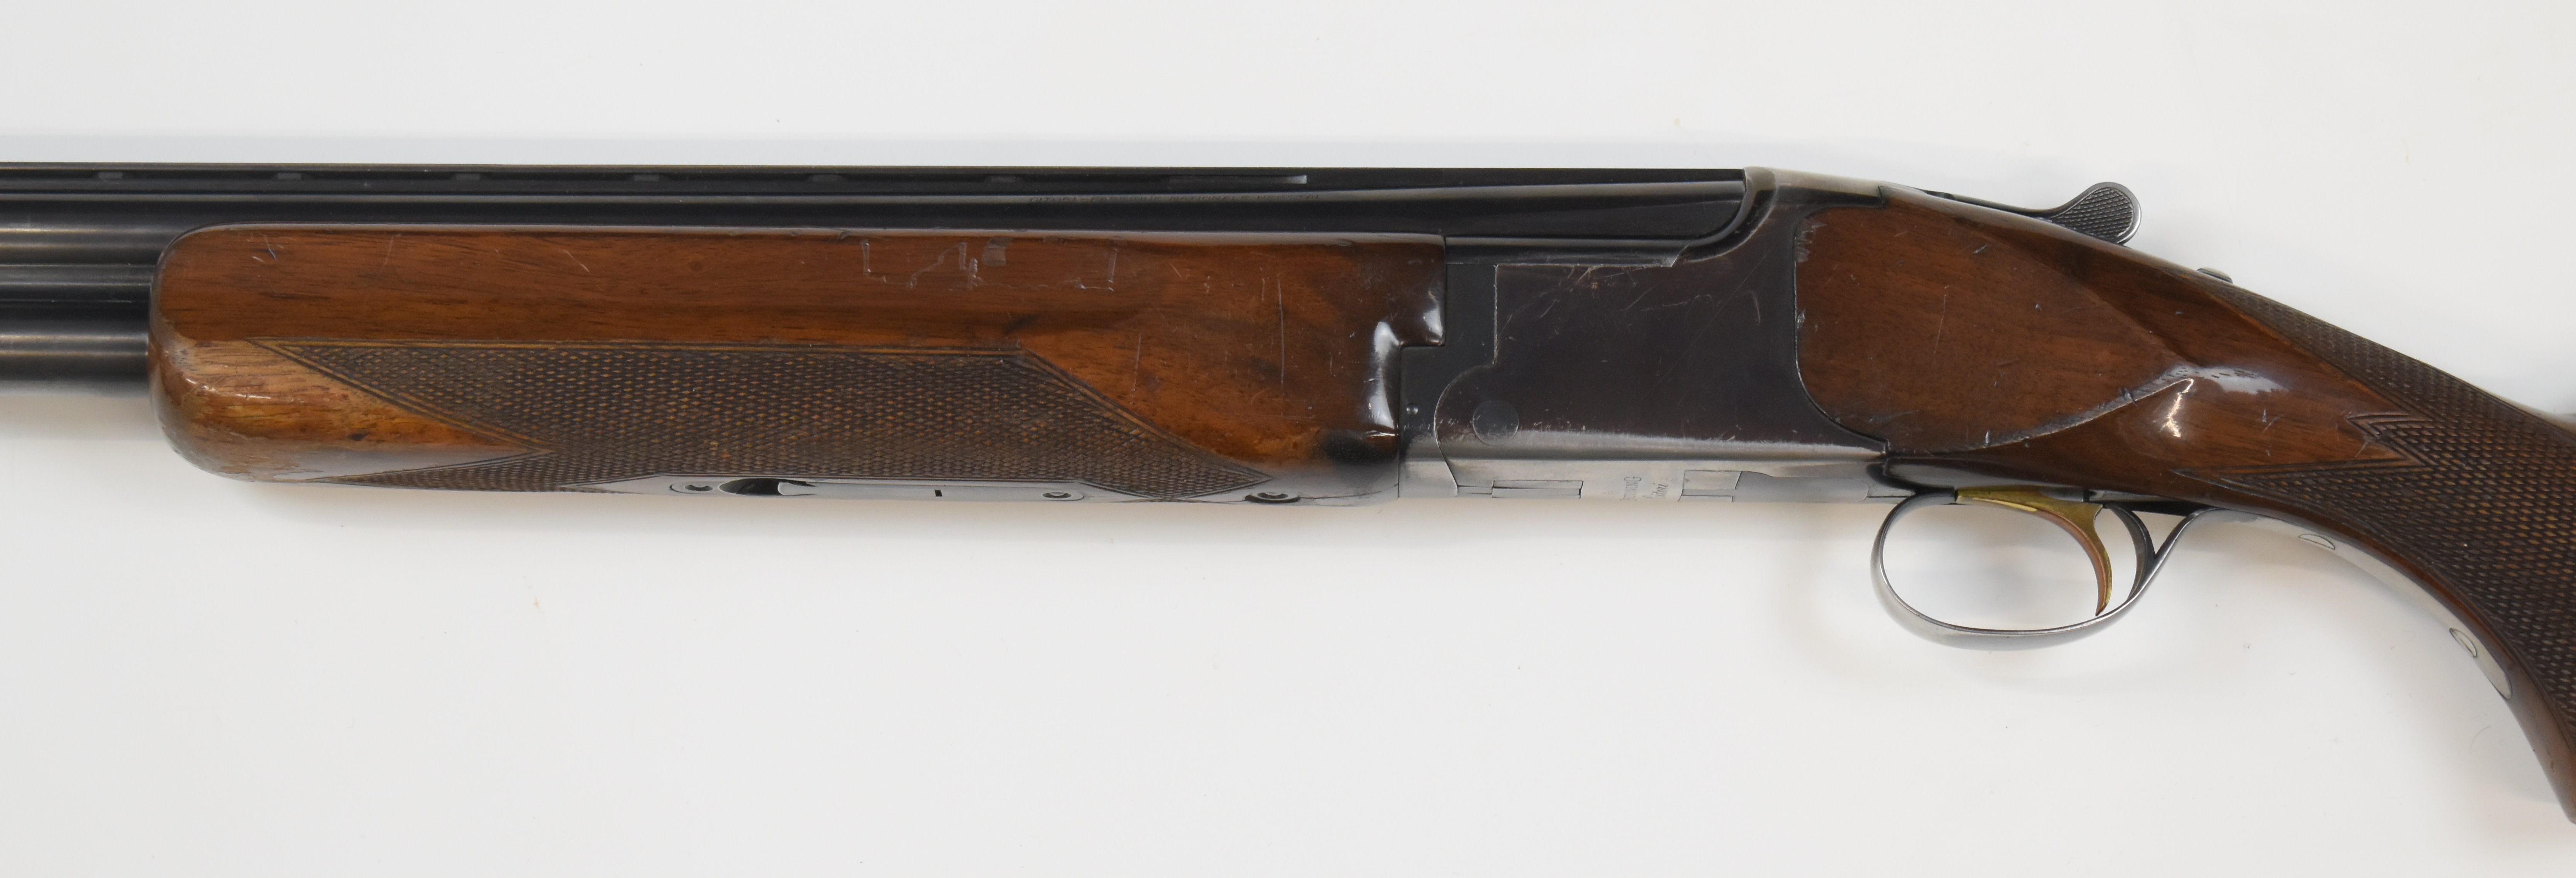 Browning Citori 12 bore over and under ejector shotgun with named underside, chequered semi-pistol - Image 8 of 10